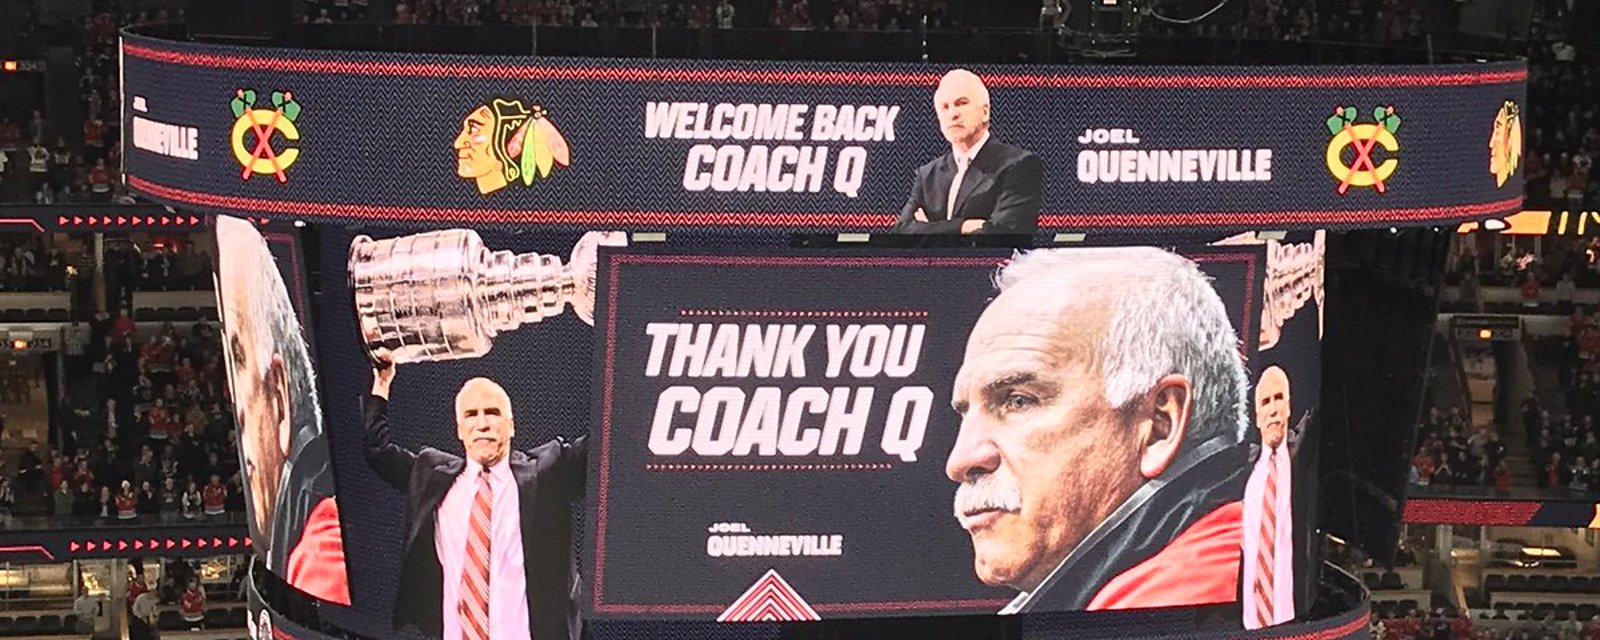 Quenneville can’t hide his emotions as Hawks play video tribute